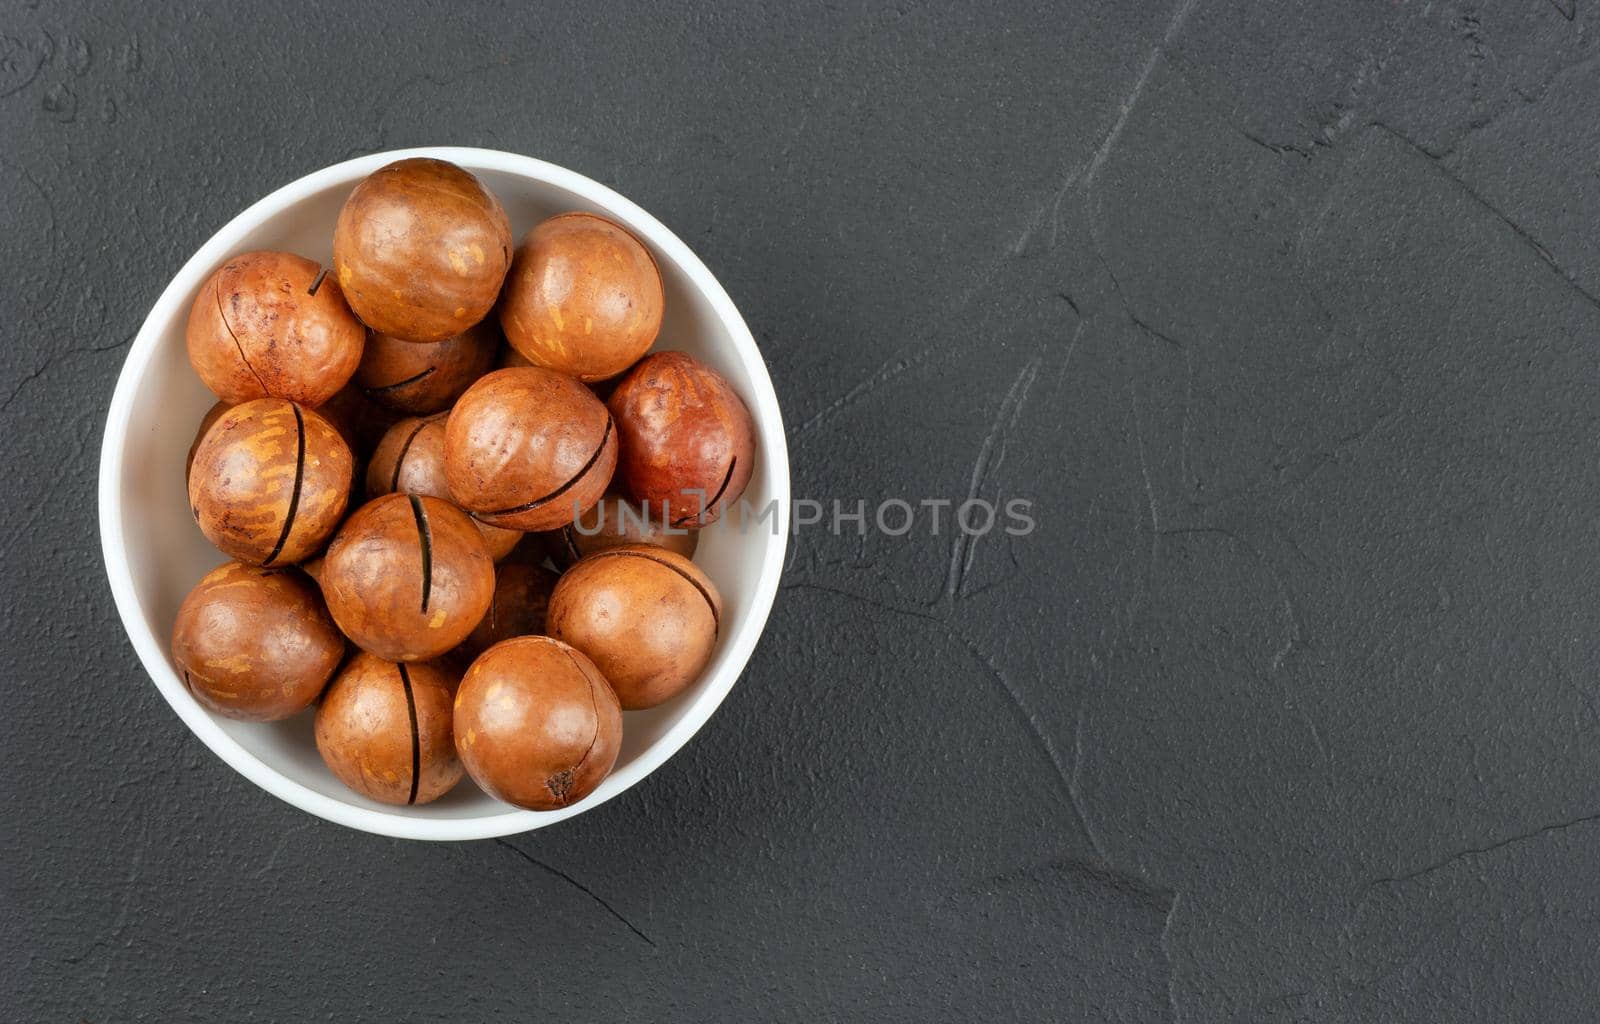 Macadamia nuts in a white bowl on an empty concrete dark background